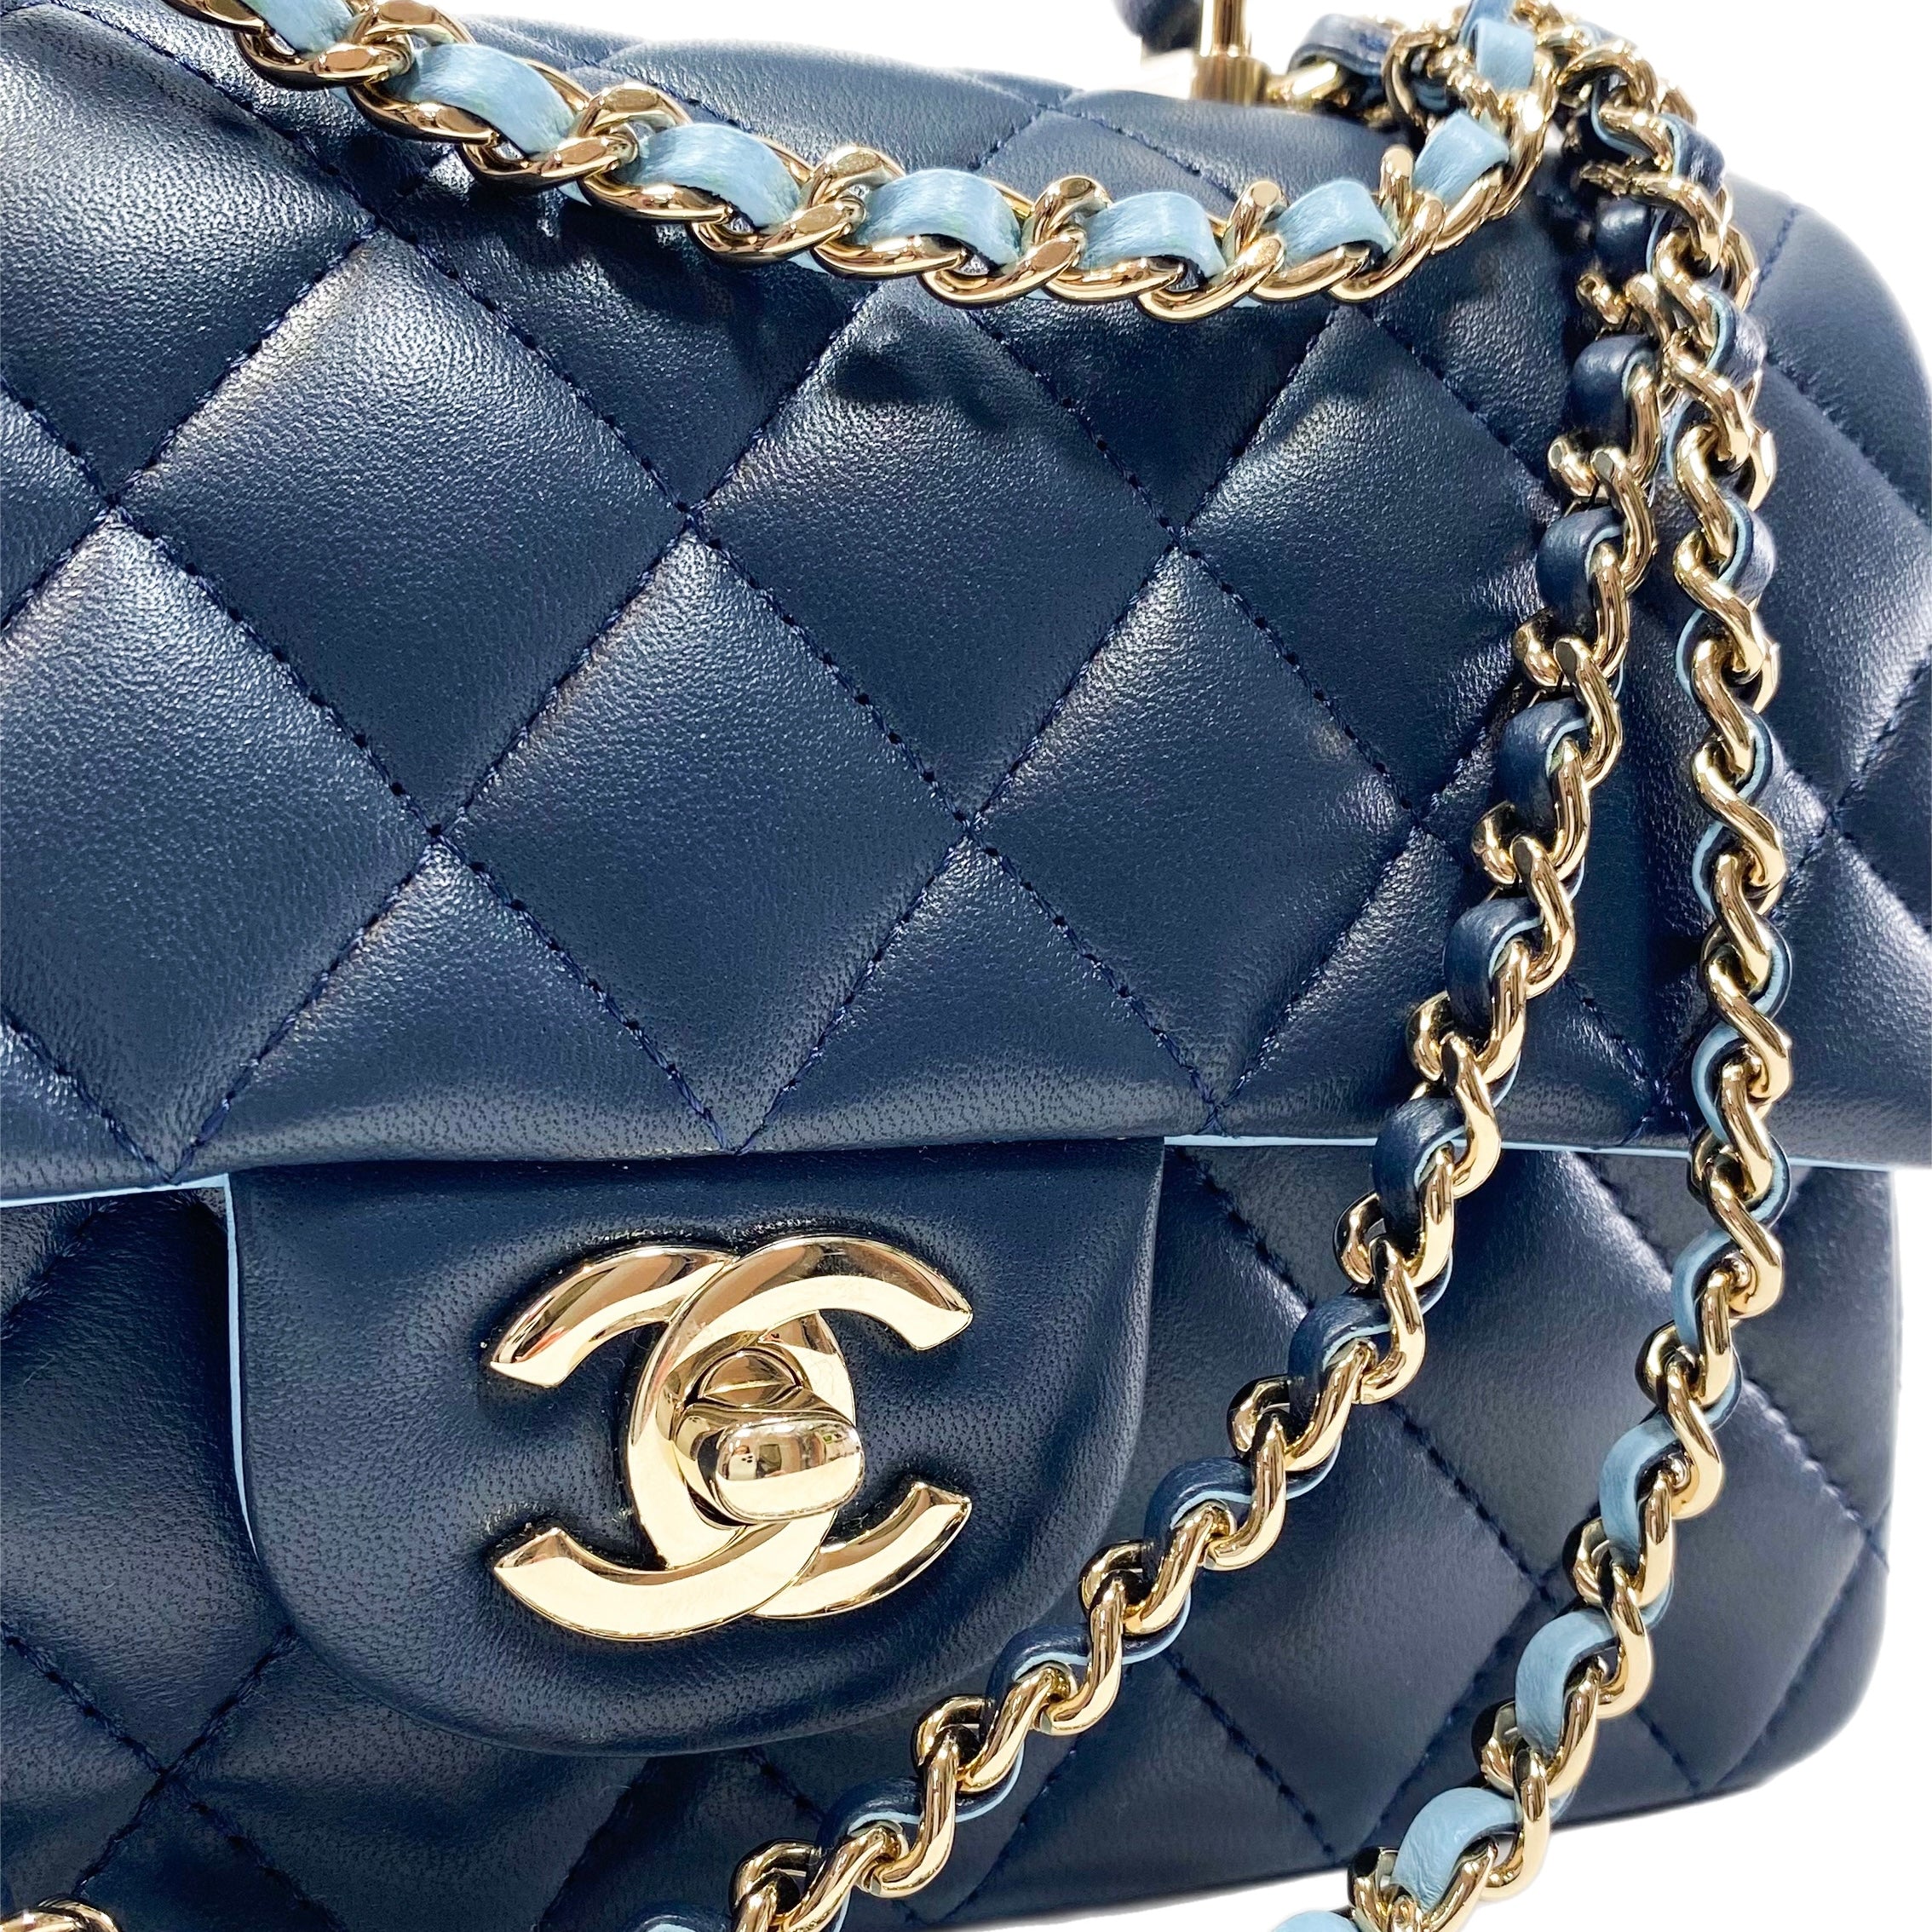 Navy Quilted Caviar Small Flap Bag Gold Hardware